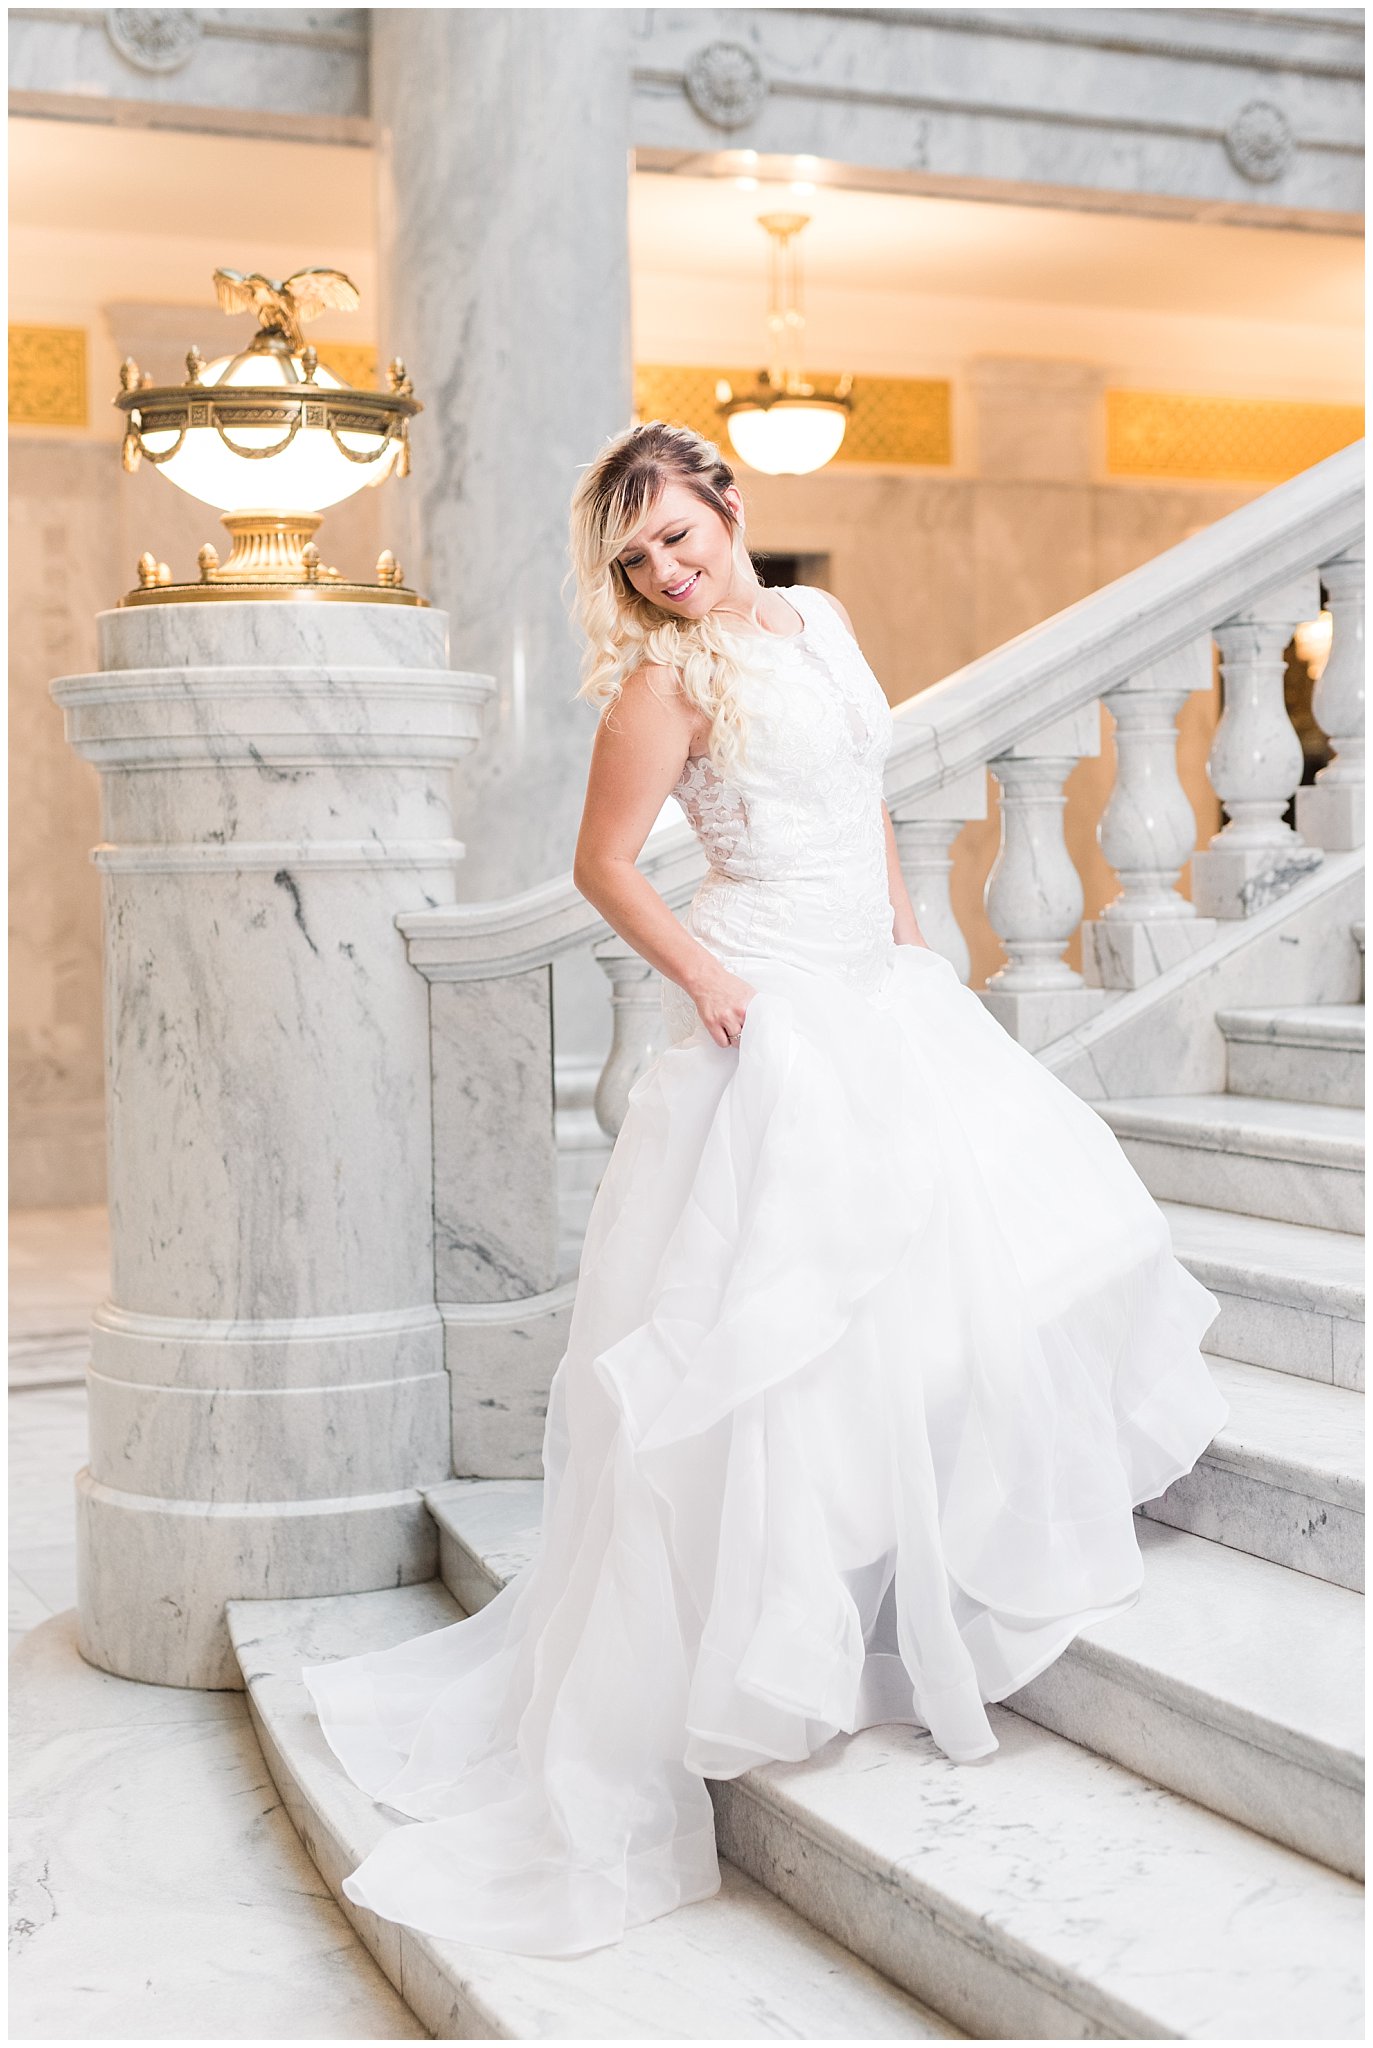 Bride climbs indoor stairs at the Utah State Capitol Building | Top Utah Wedding and Couples Photos 2019 | Jessie and Dallin Photography